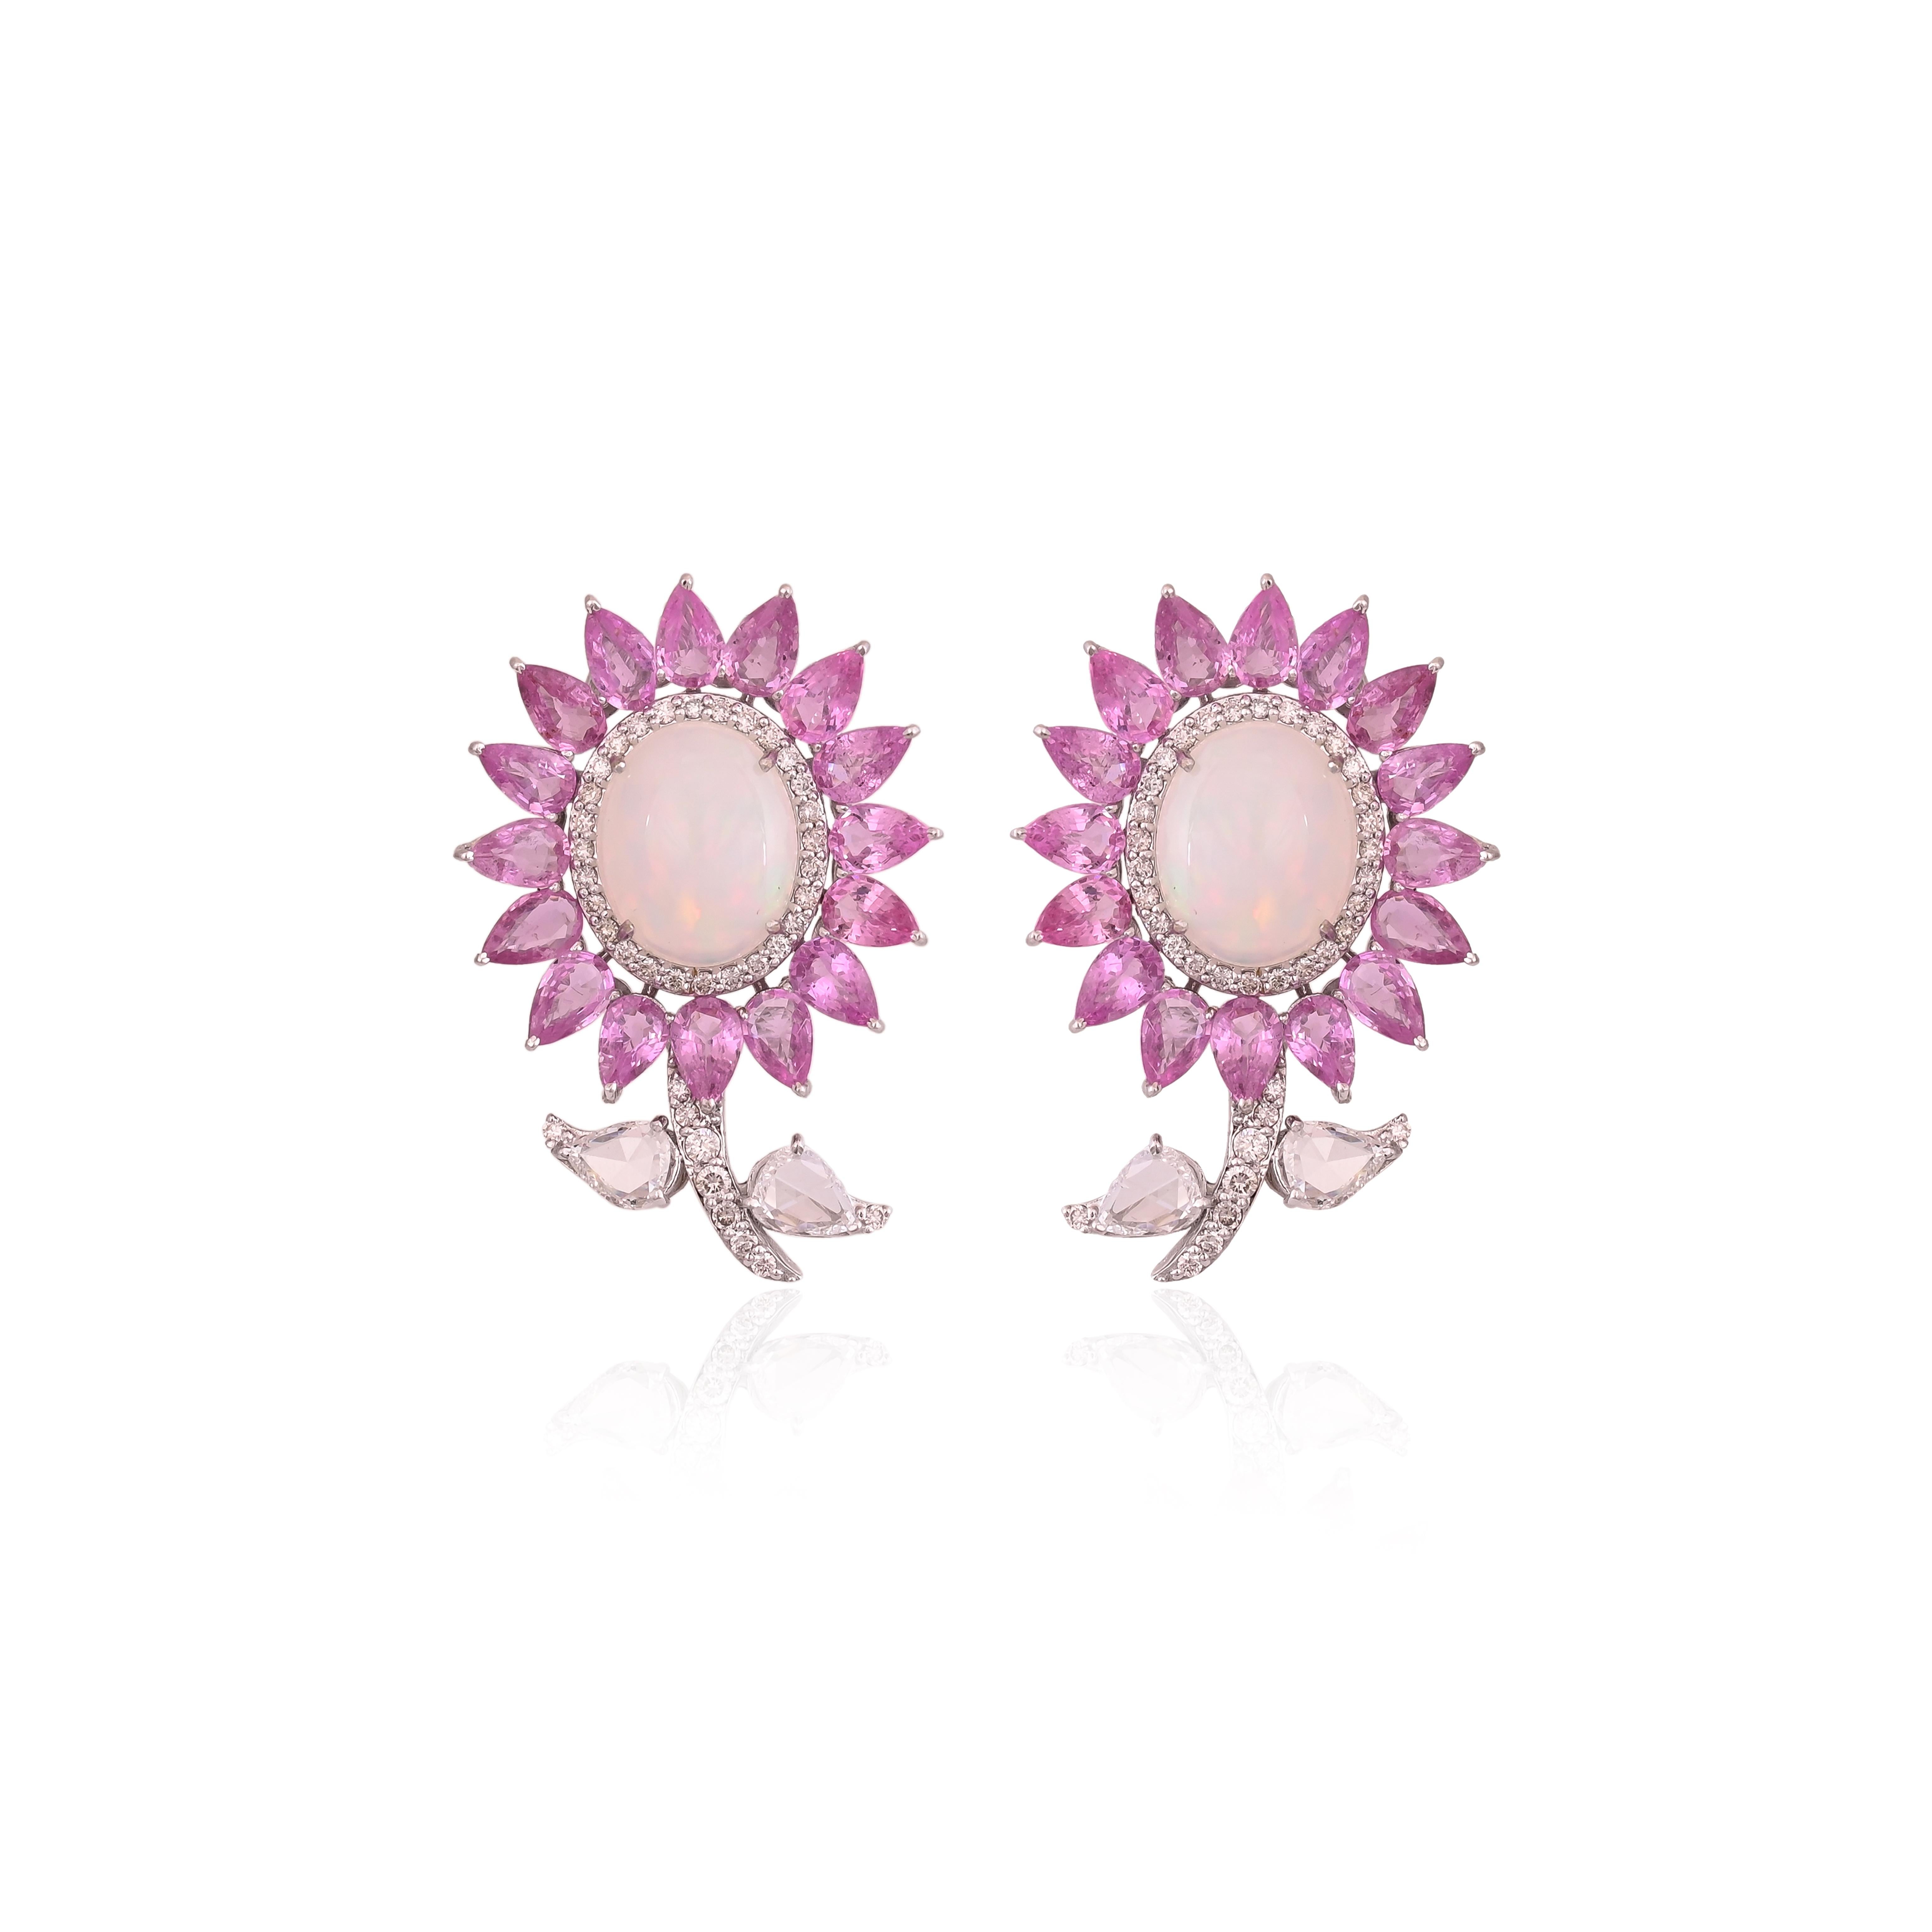 A very gorgeous and modern, Opal & Pink Sapphires Stud Earrings set in 18K White Gold & Diamonds. The weight of the Opals is 3.51 carats. The Opals are of Ethiopian origin. The Pink Sapphires weigh 7.32 carats. The Pink Sapphires are of Madagascar